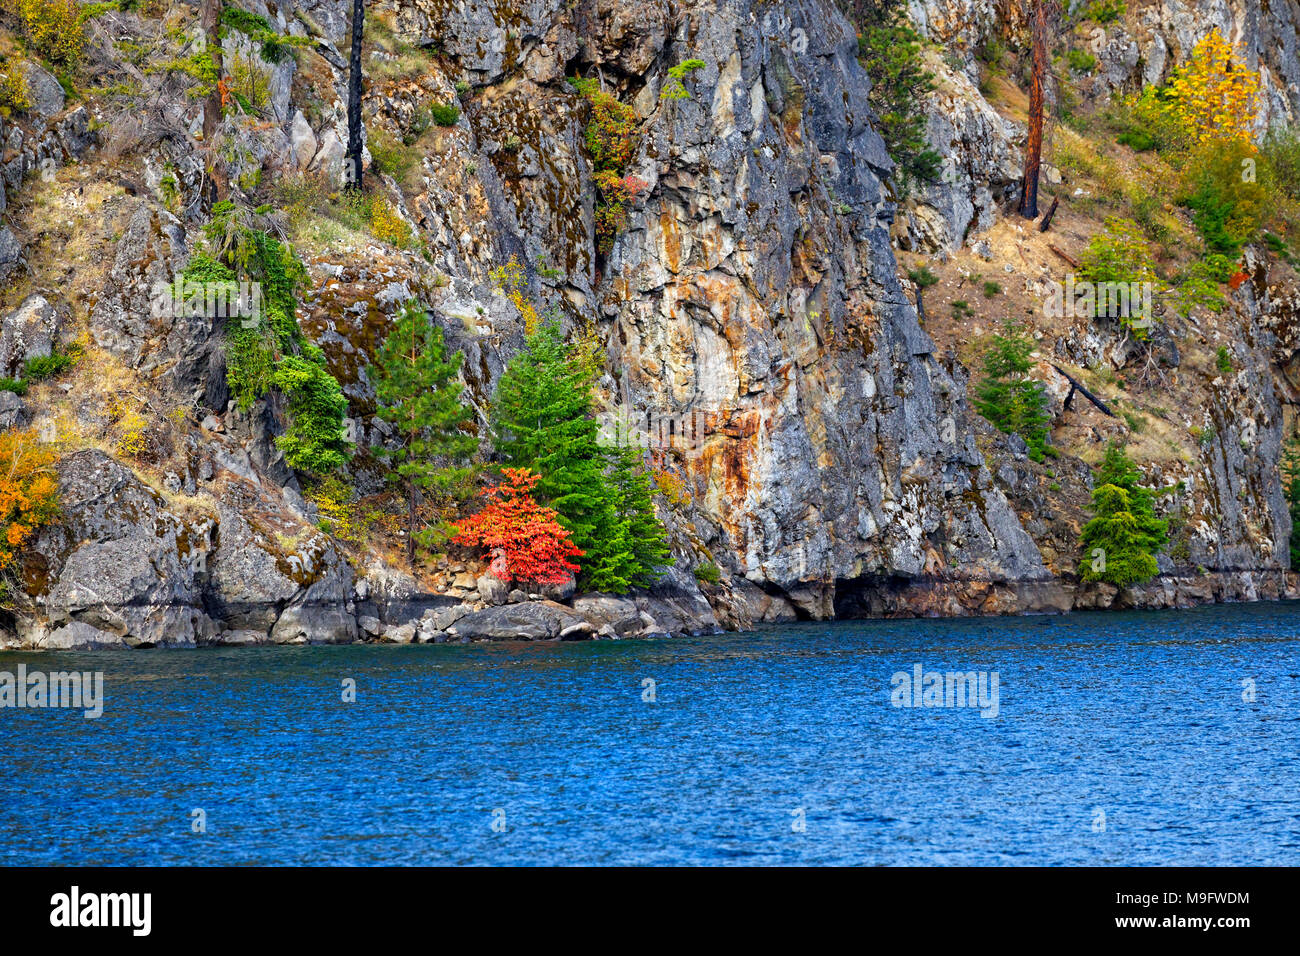 41,926.03533 Close-up of the shore of deep blue Lake Chelan where it comes to the face of a steep rock cliff with small trees and orange fall color Stock Photo